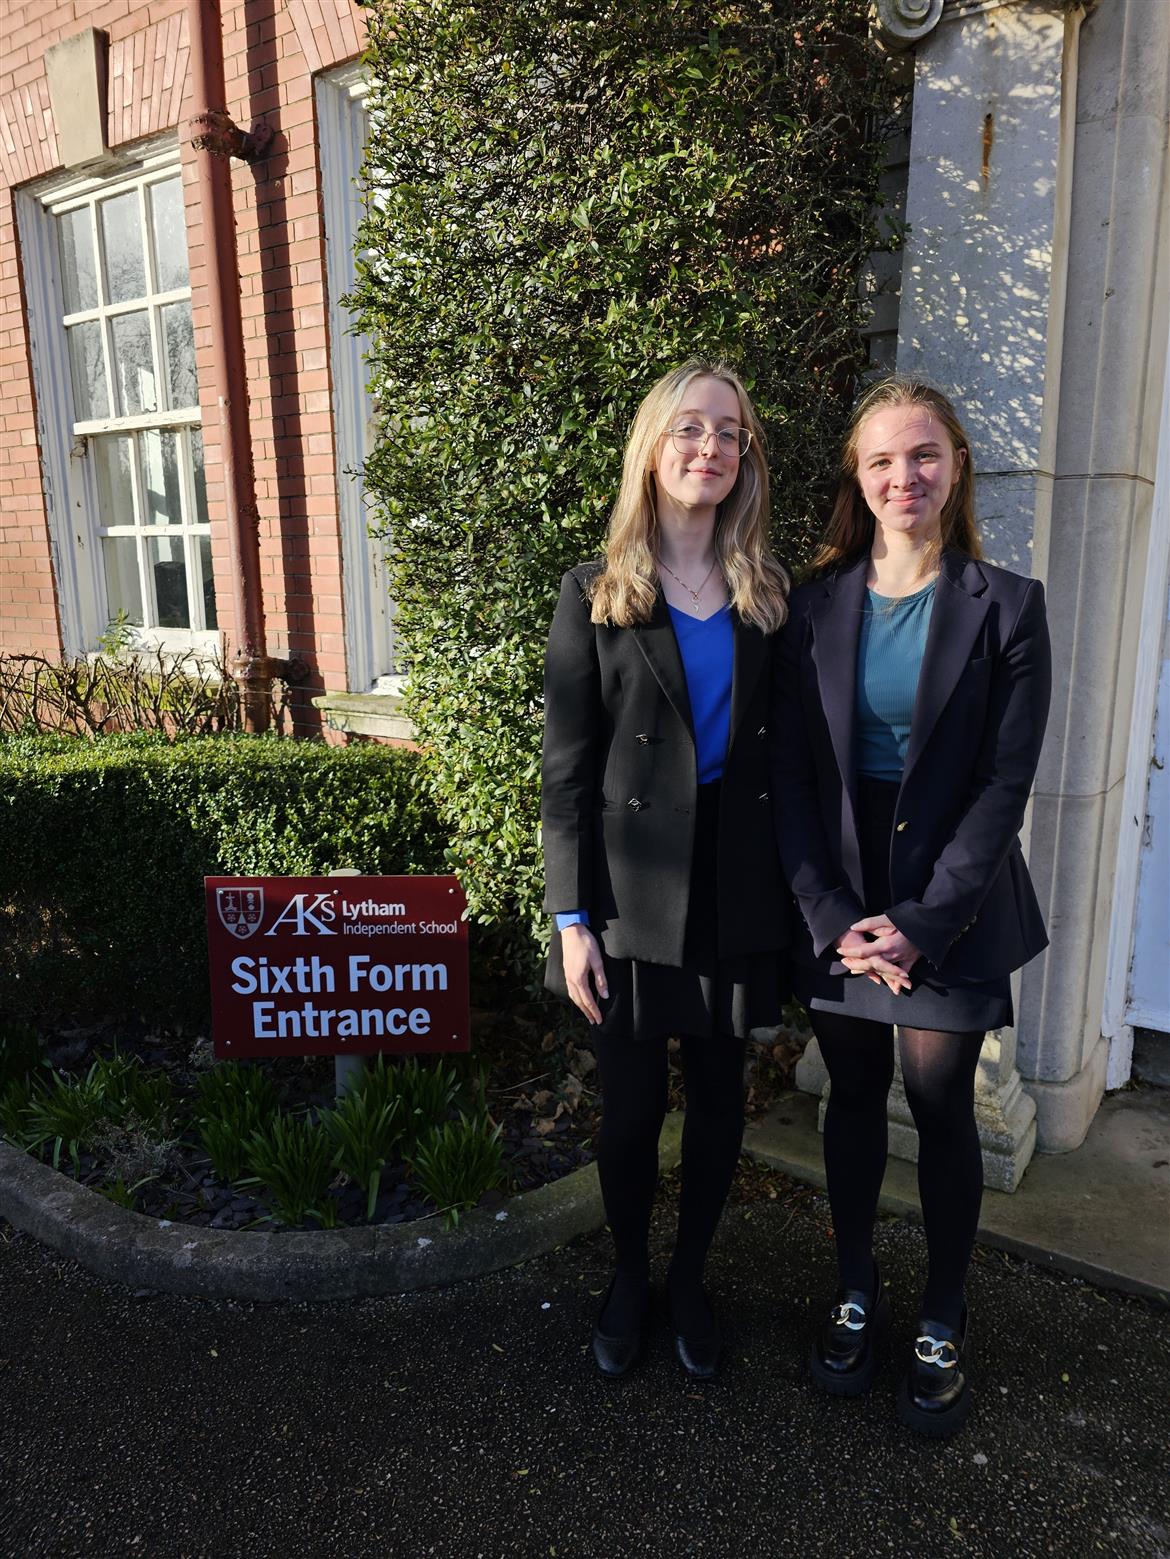 Cambridge offers for AKS Sixth Form students